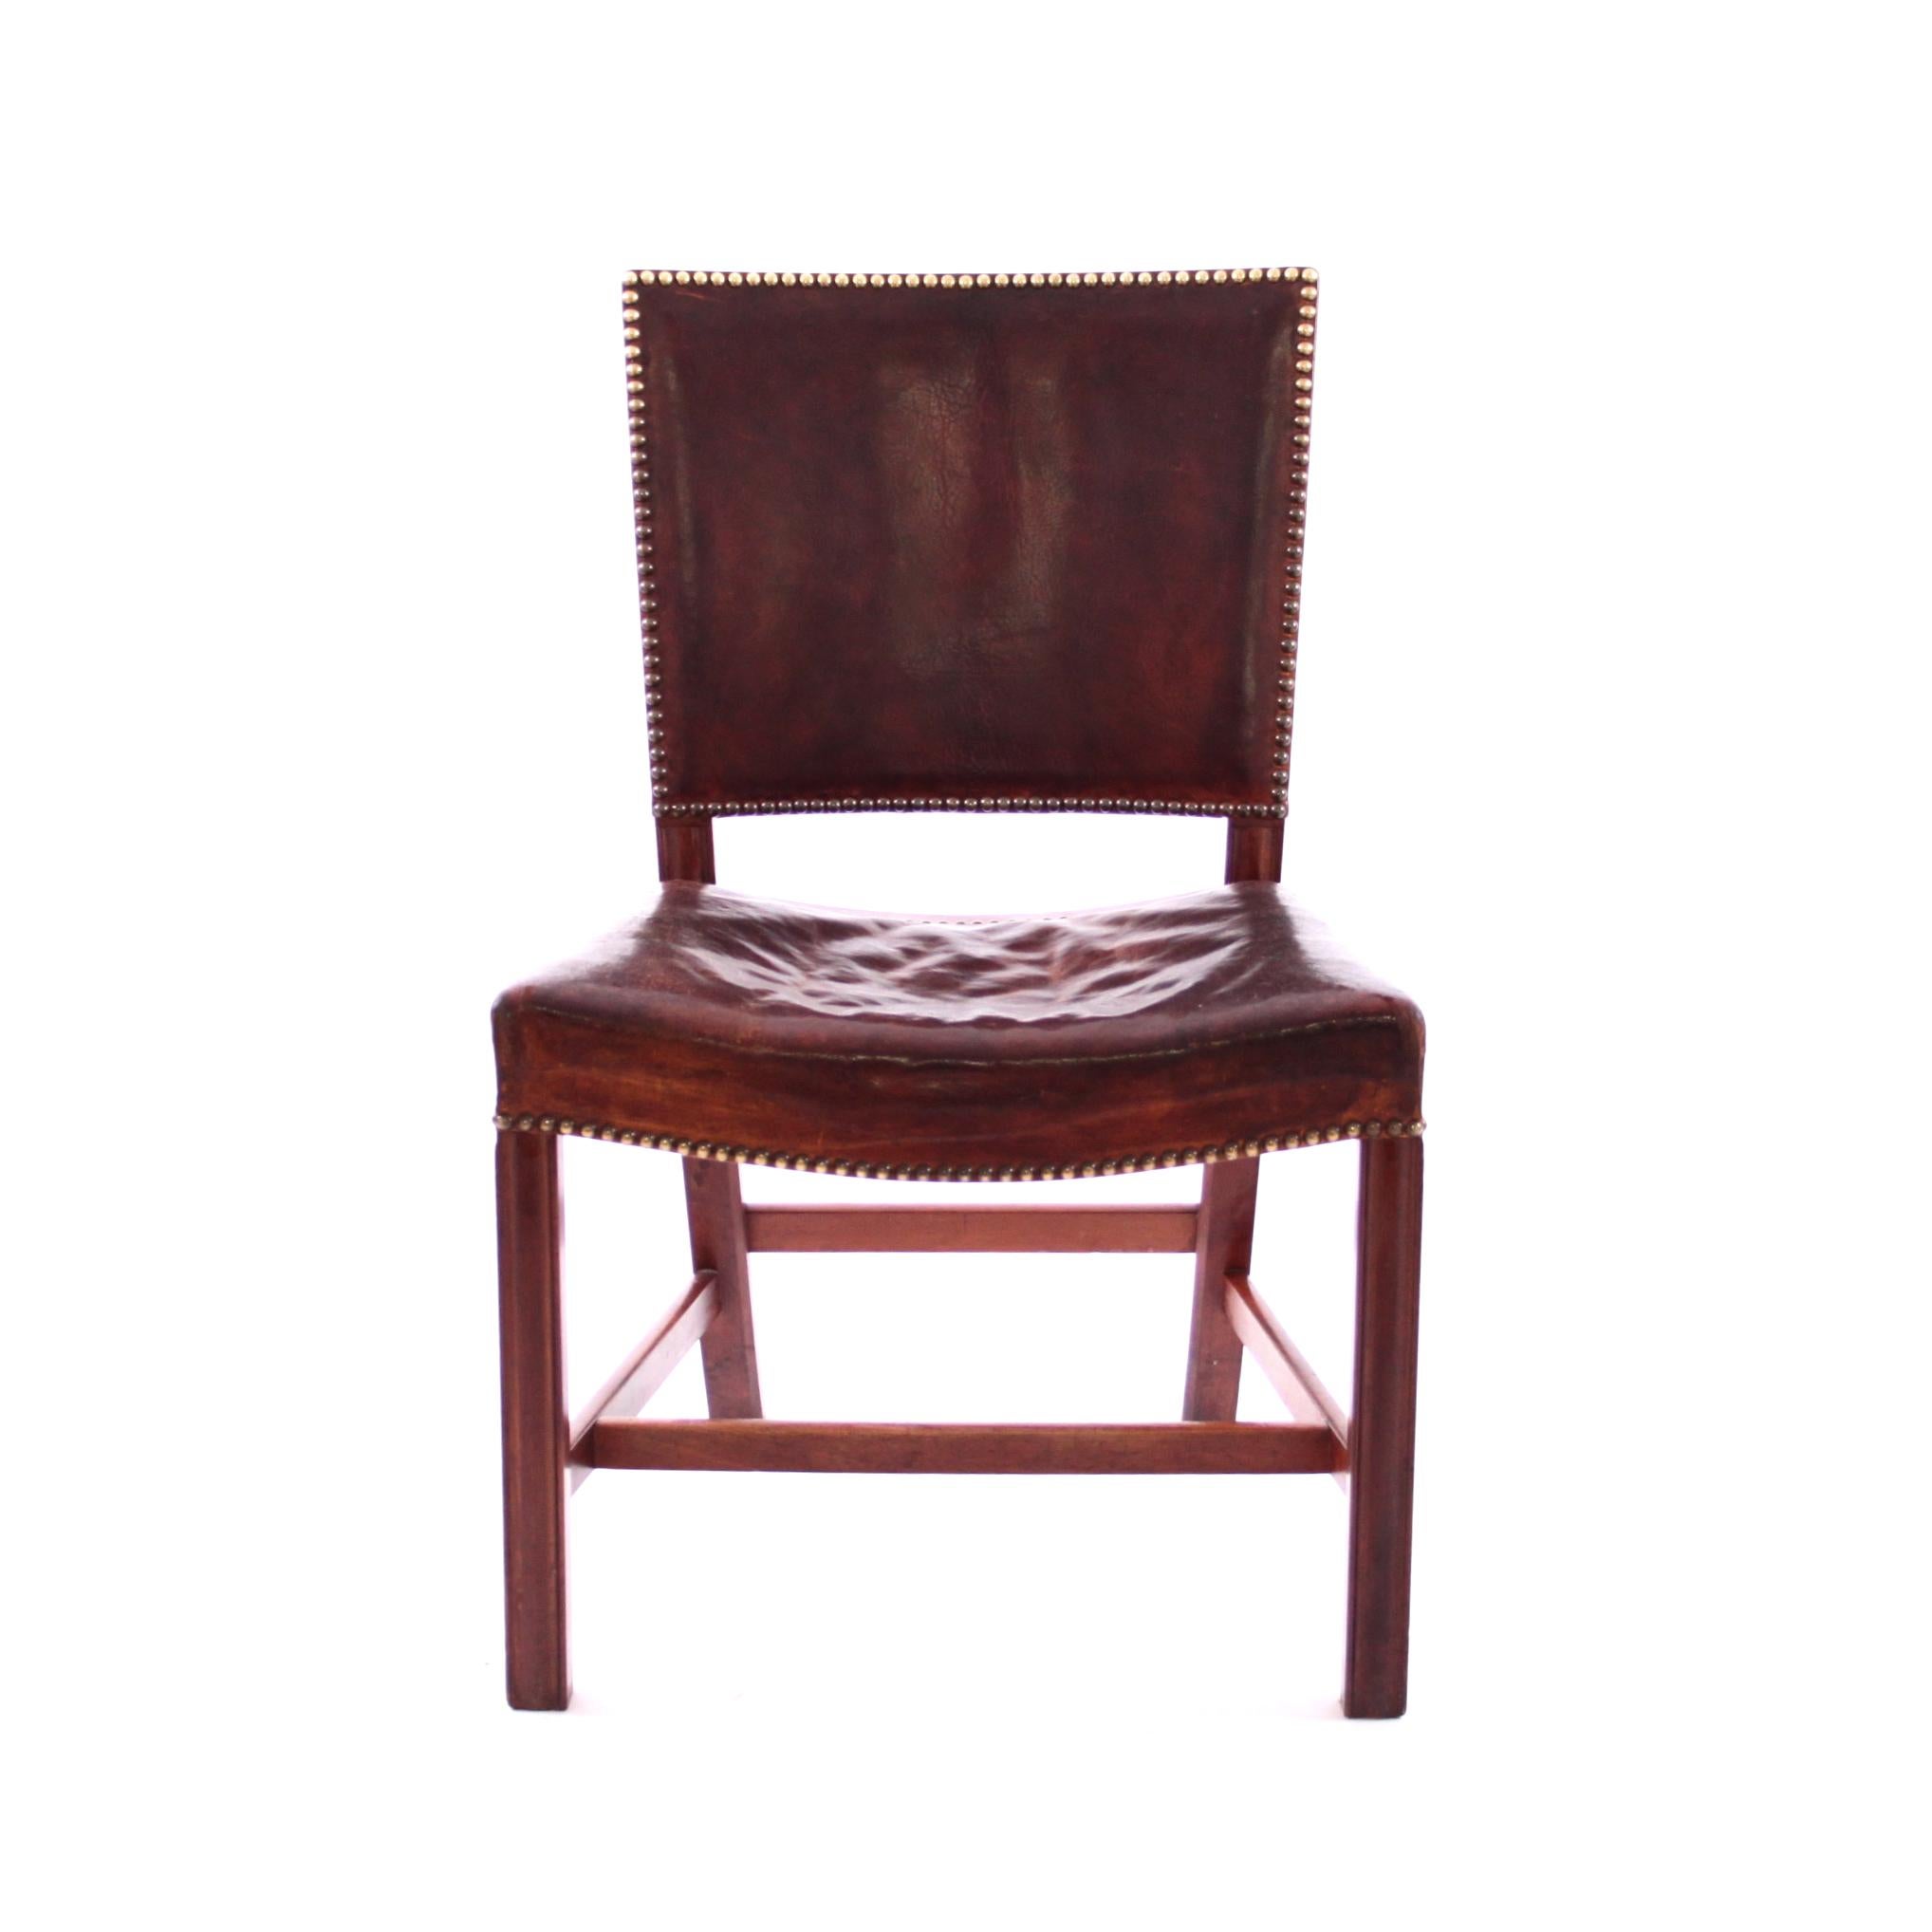 Kaare Klint & Rud Rasmussen Snedkerier - Scandinavian Modern

A beautiful early Kaare Klint red chair / Barcelona chair with mahogany frame, brass nails and original patinated Niger leather that the Kaare Klint red chairs are so famous